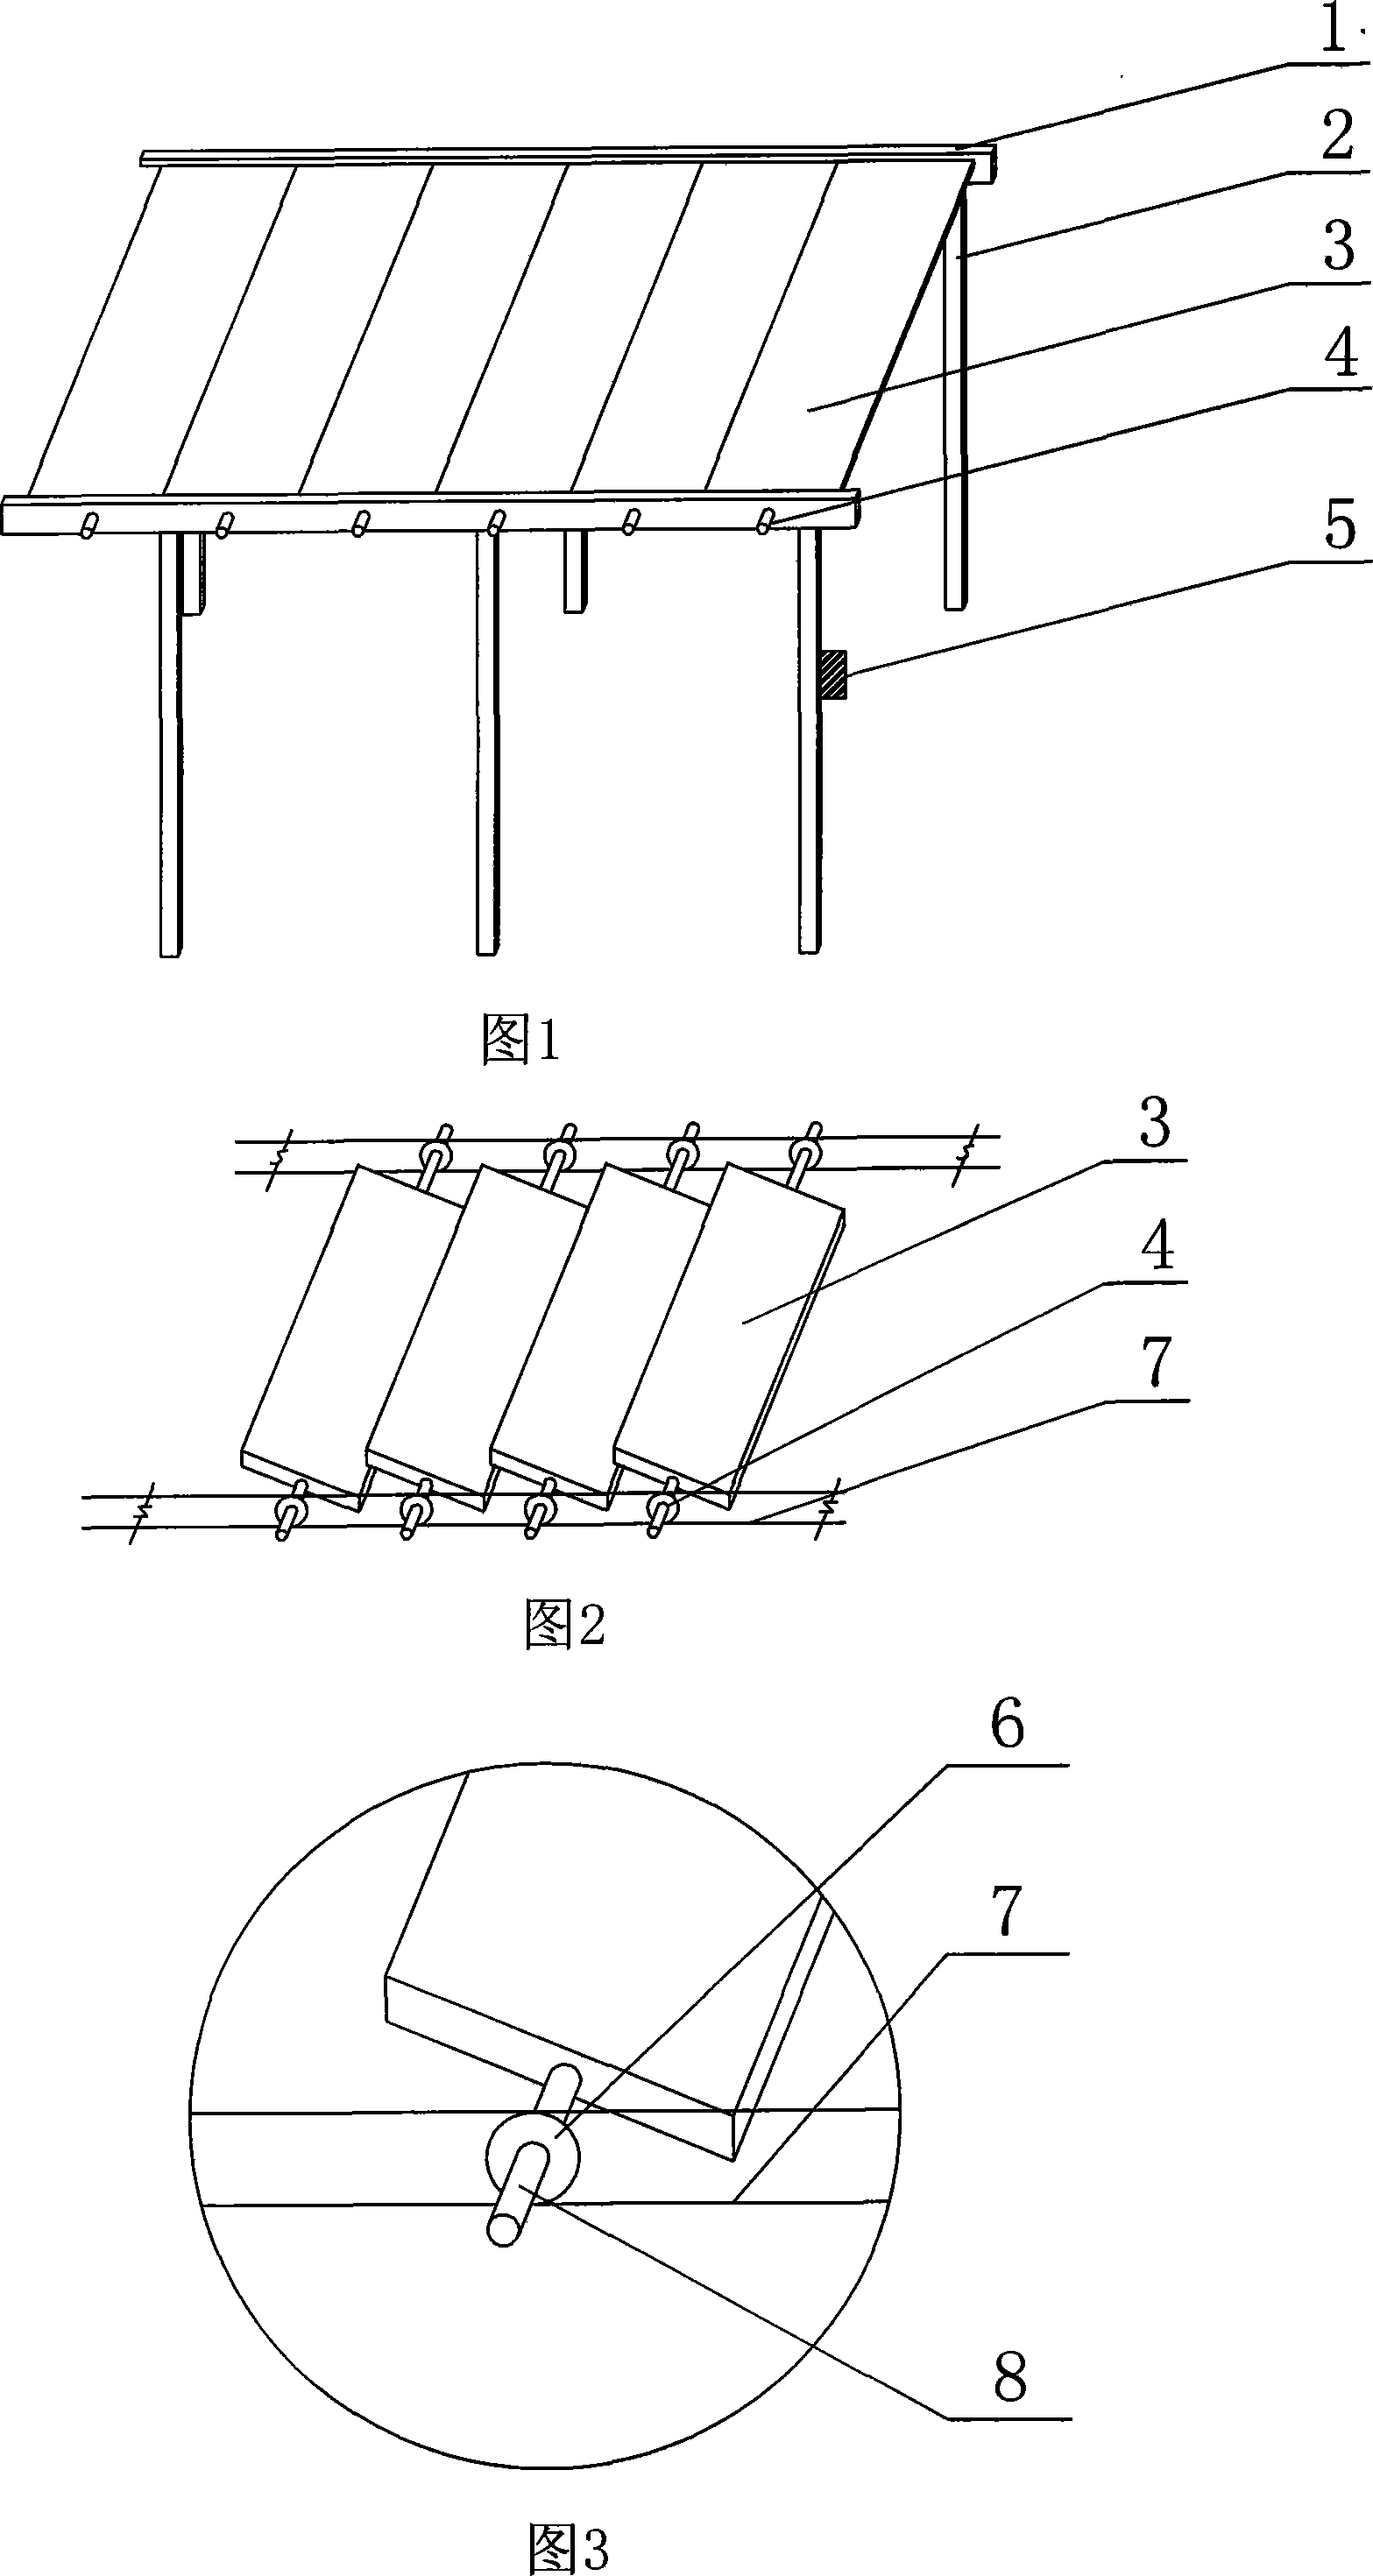 Method and device for automatically regulating sunlight strength and promoting vegetation